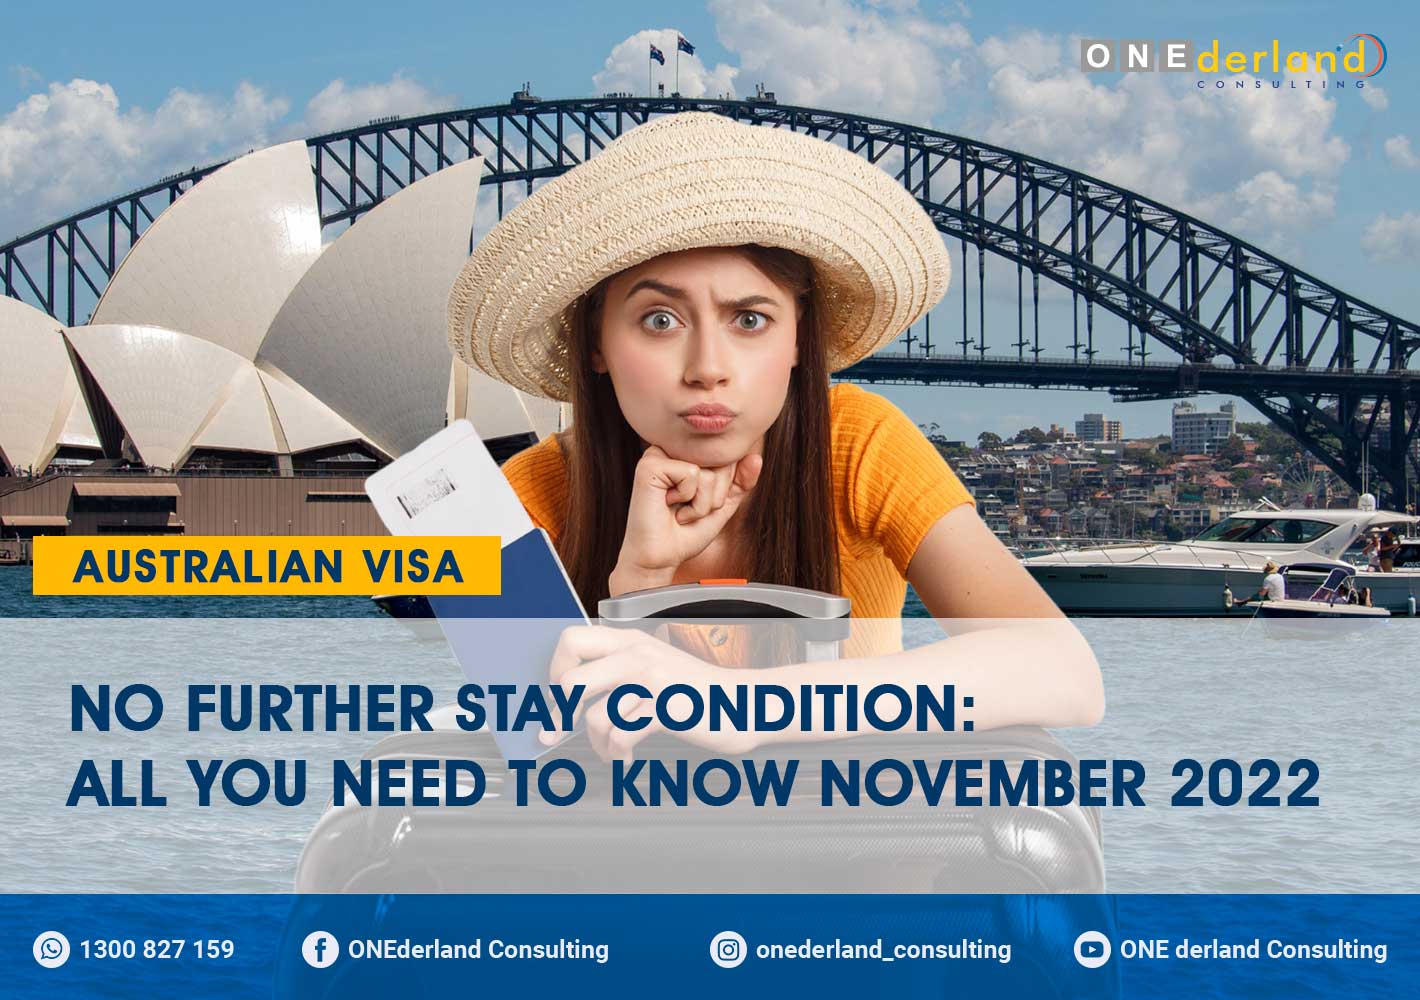 What is a No Further Stay Condition and How to Waive the Condition in November 2022?